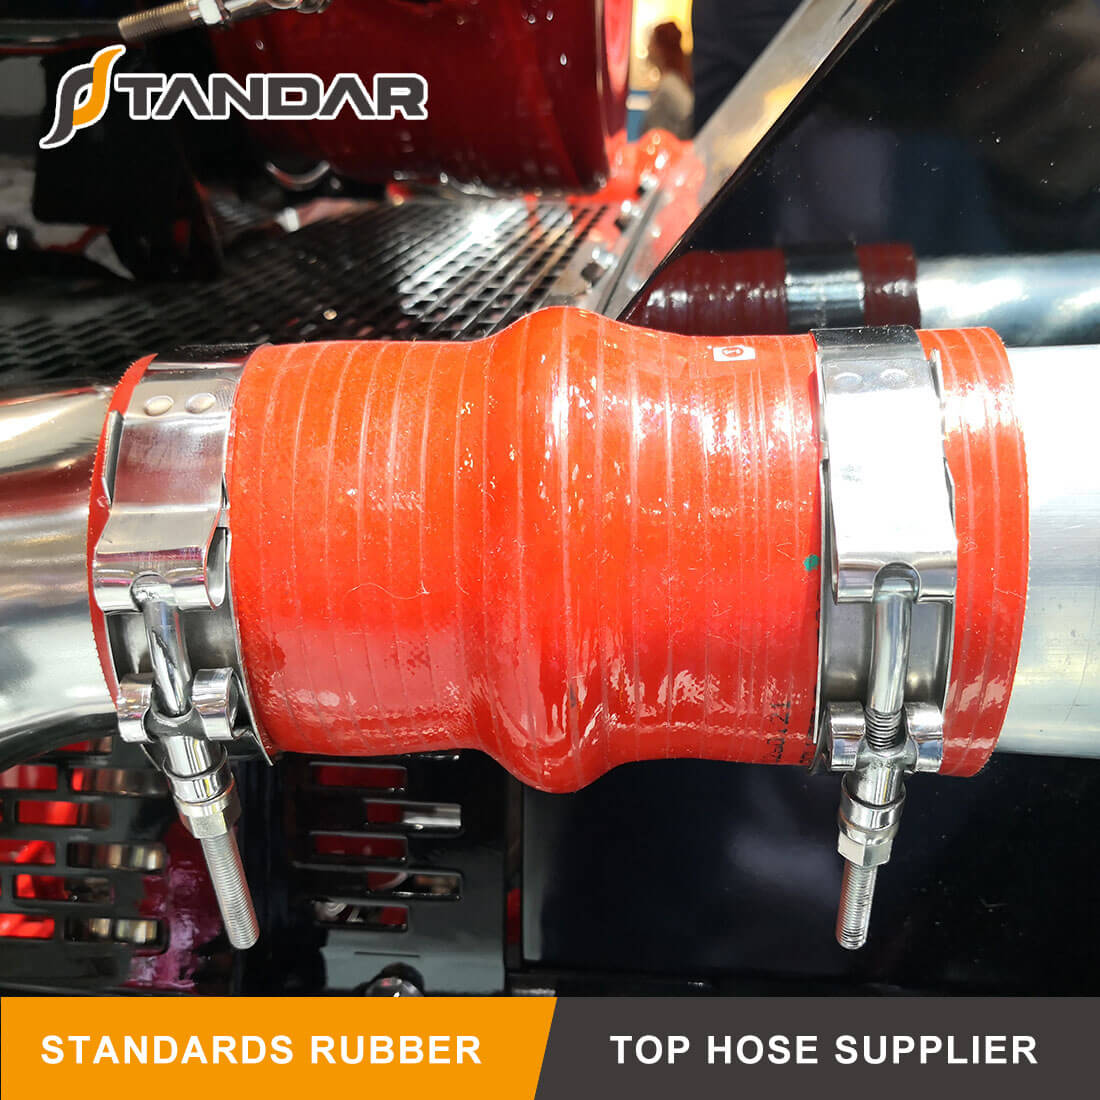 488368 Turbo Air Hose for Scania truck